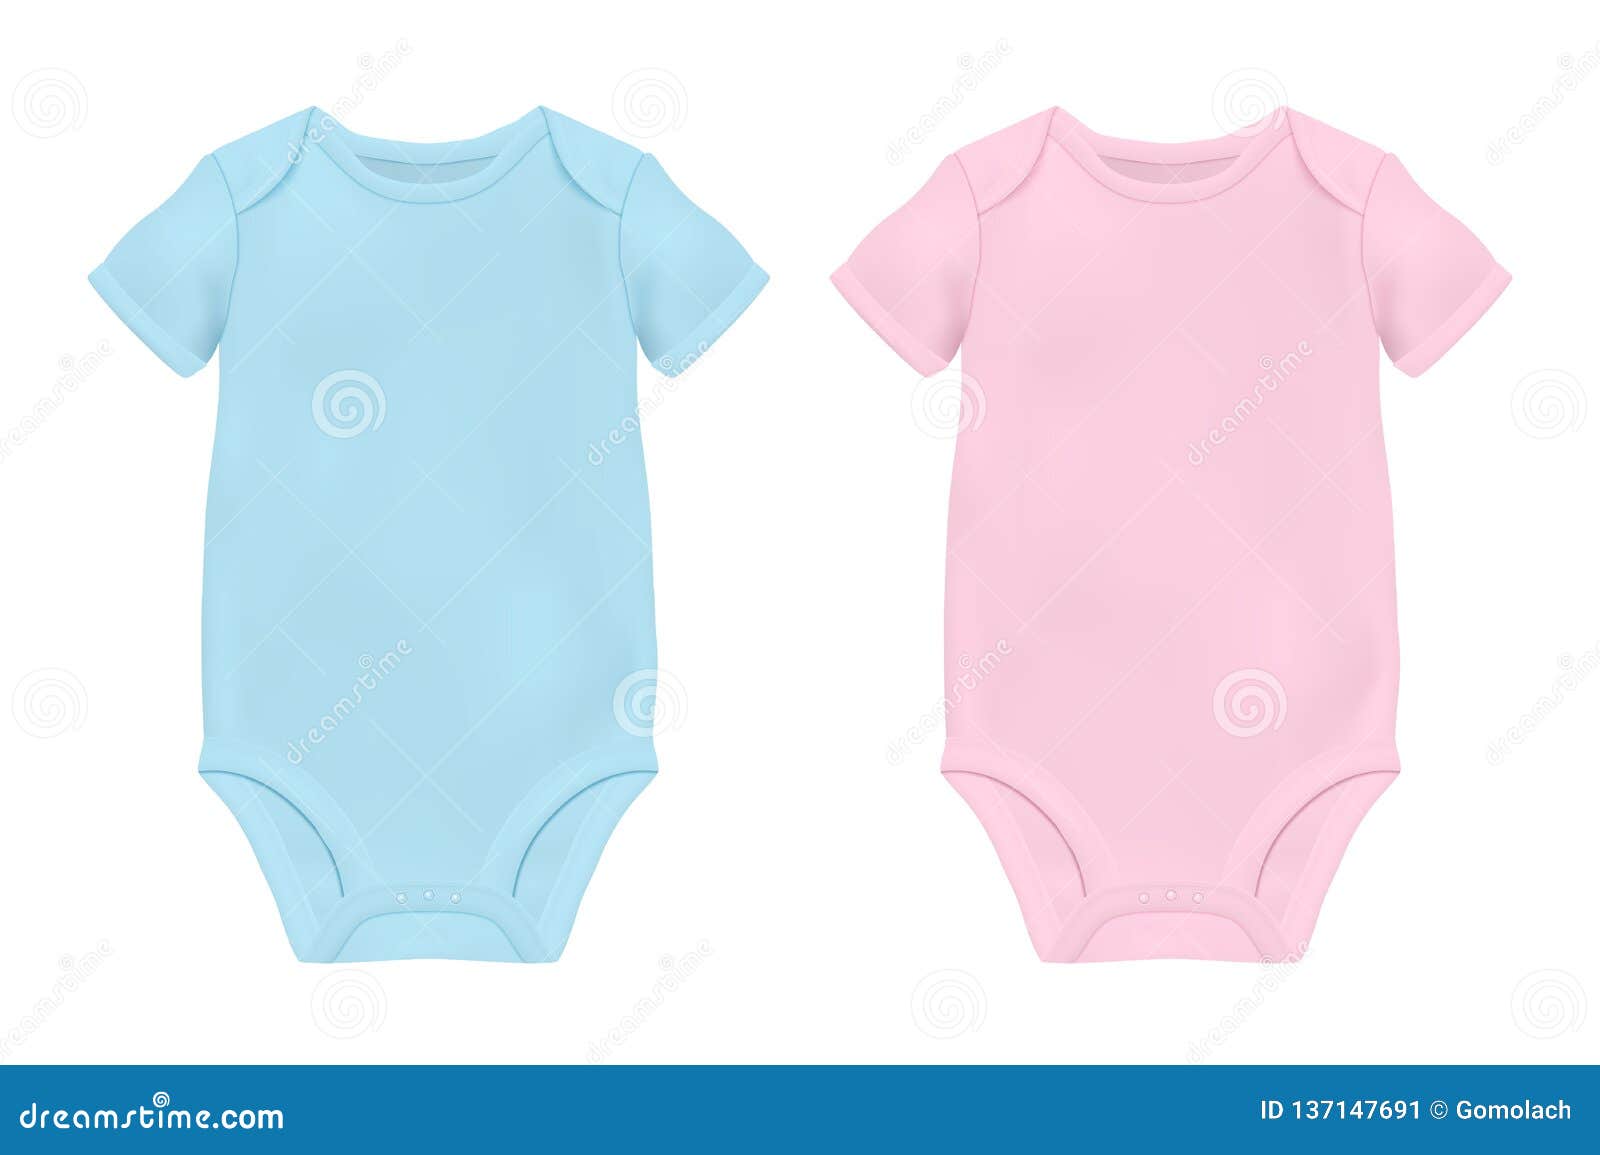 Download Vector Realistic Blue And Pink Blank Baby Bodysuit ...